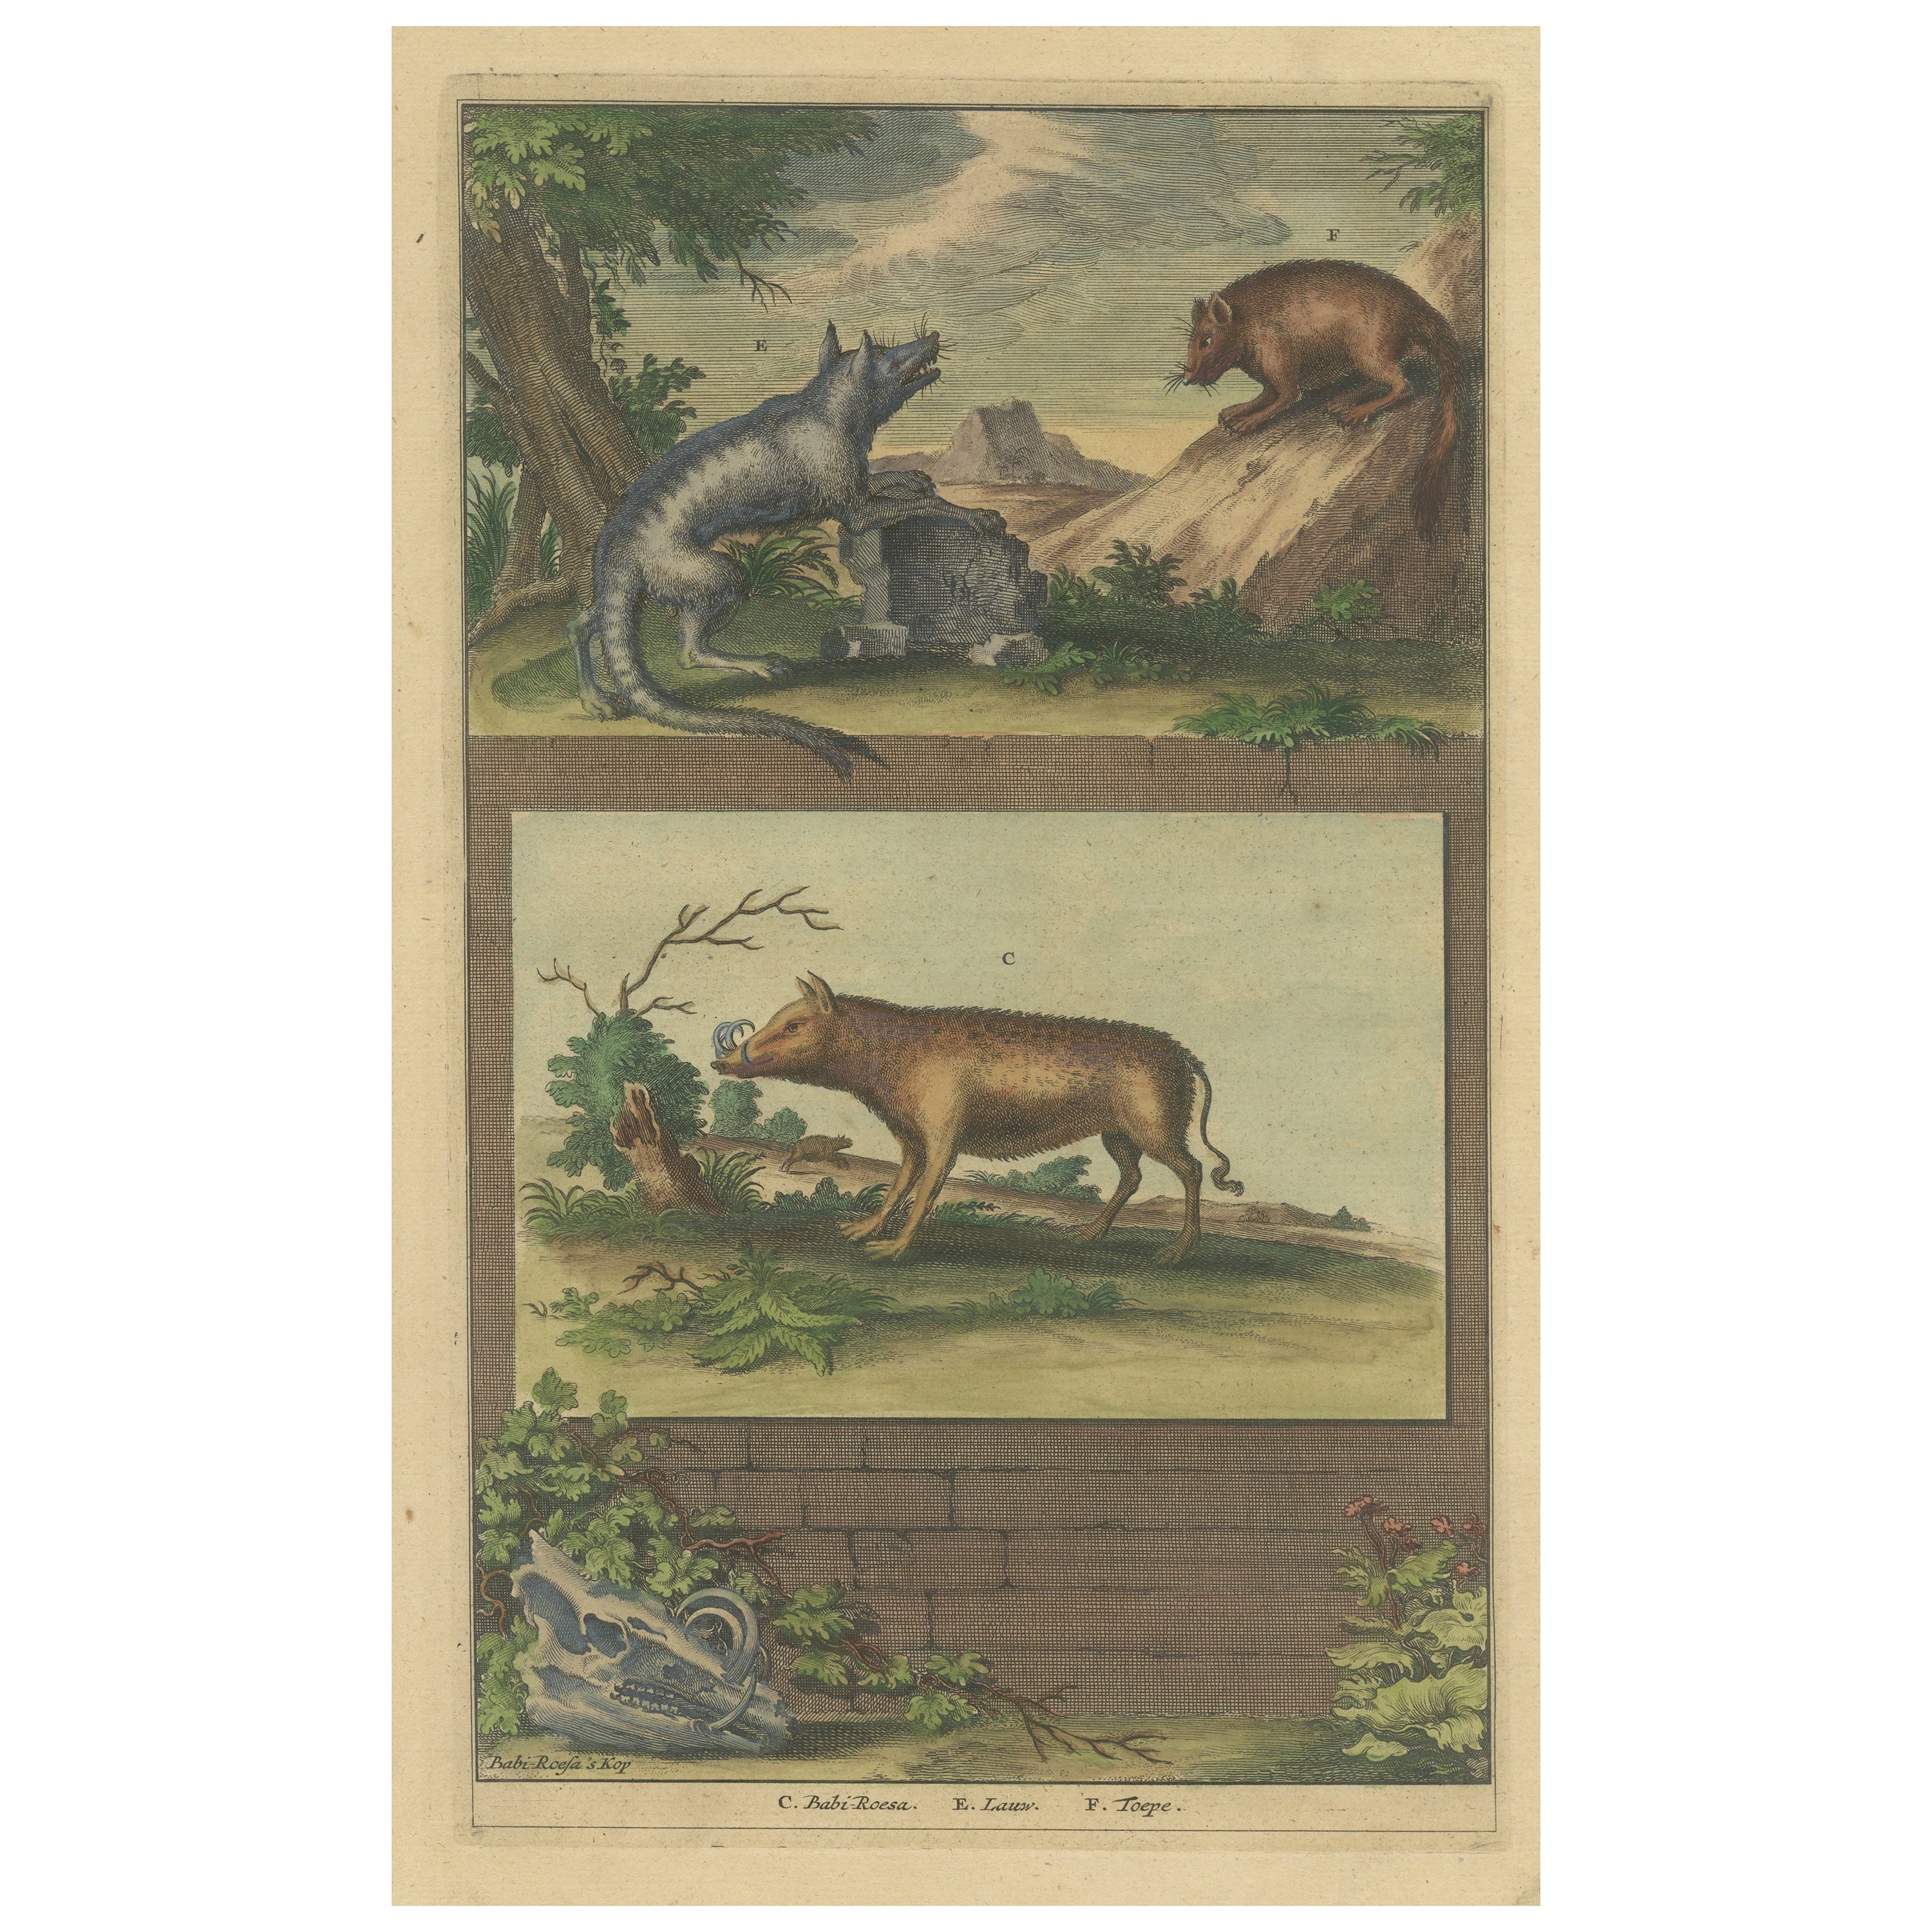 Colored Antique Print of a Babirusa and Two Other Animals